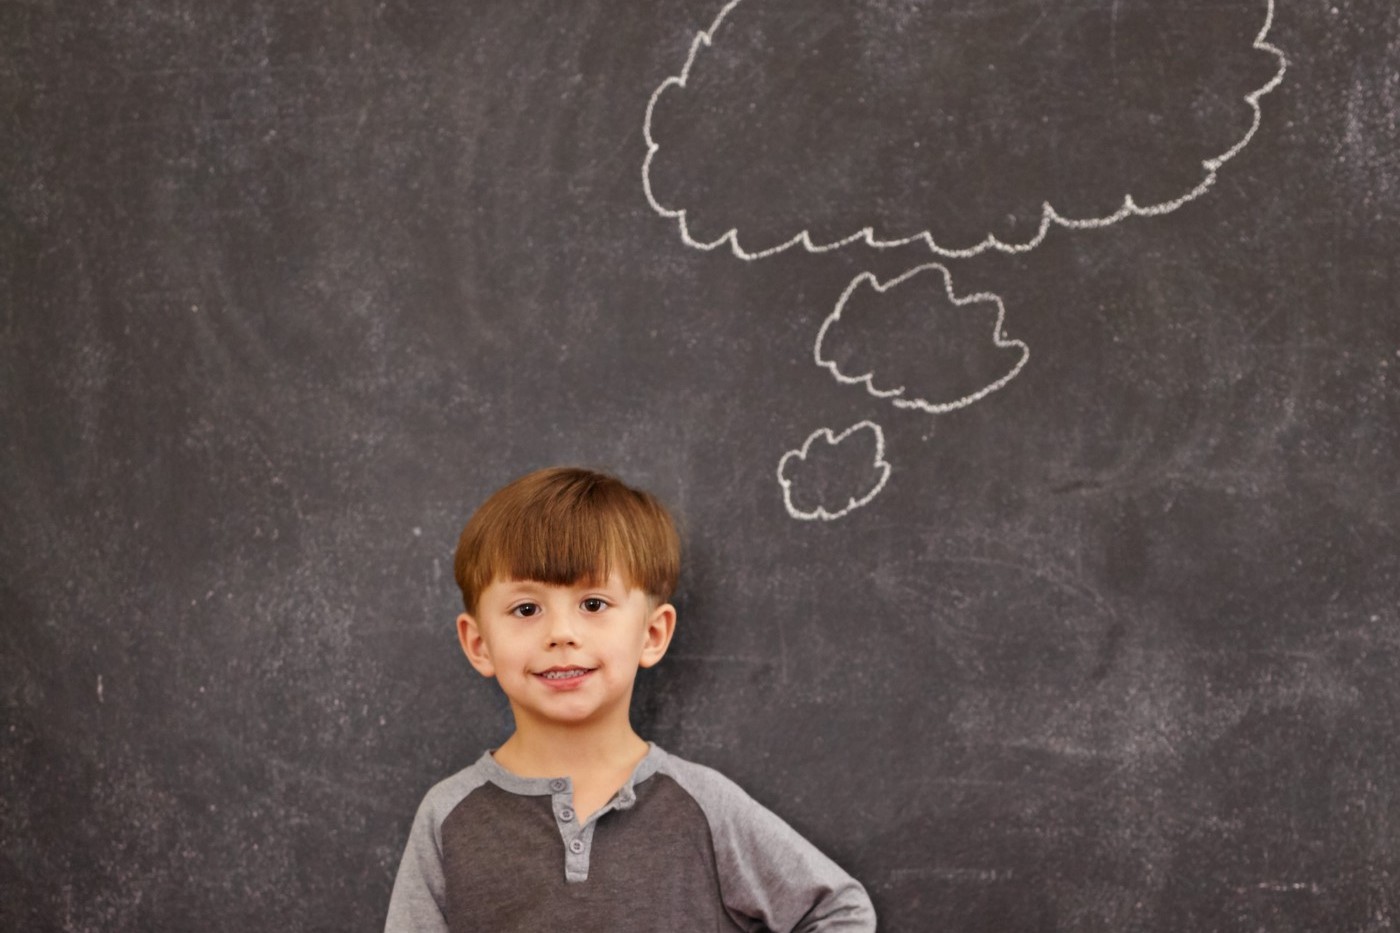 A boy standing in front of blackboard and an imaginary cloud above his head